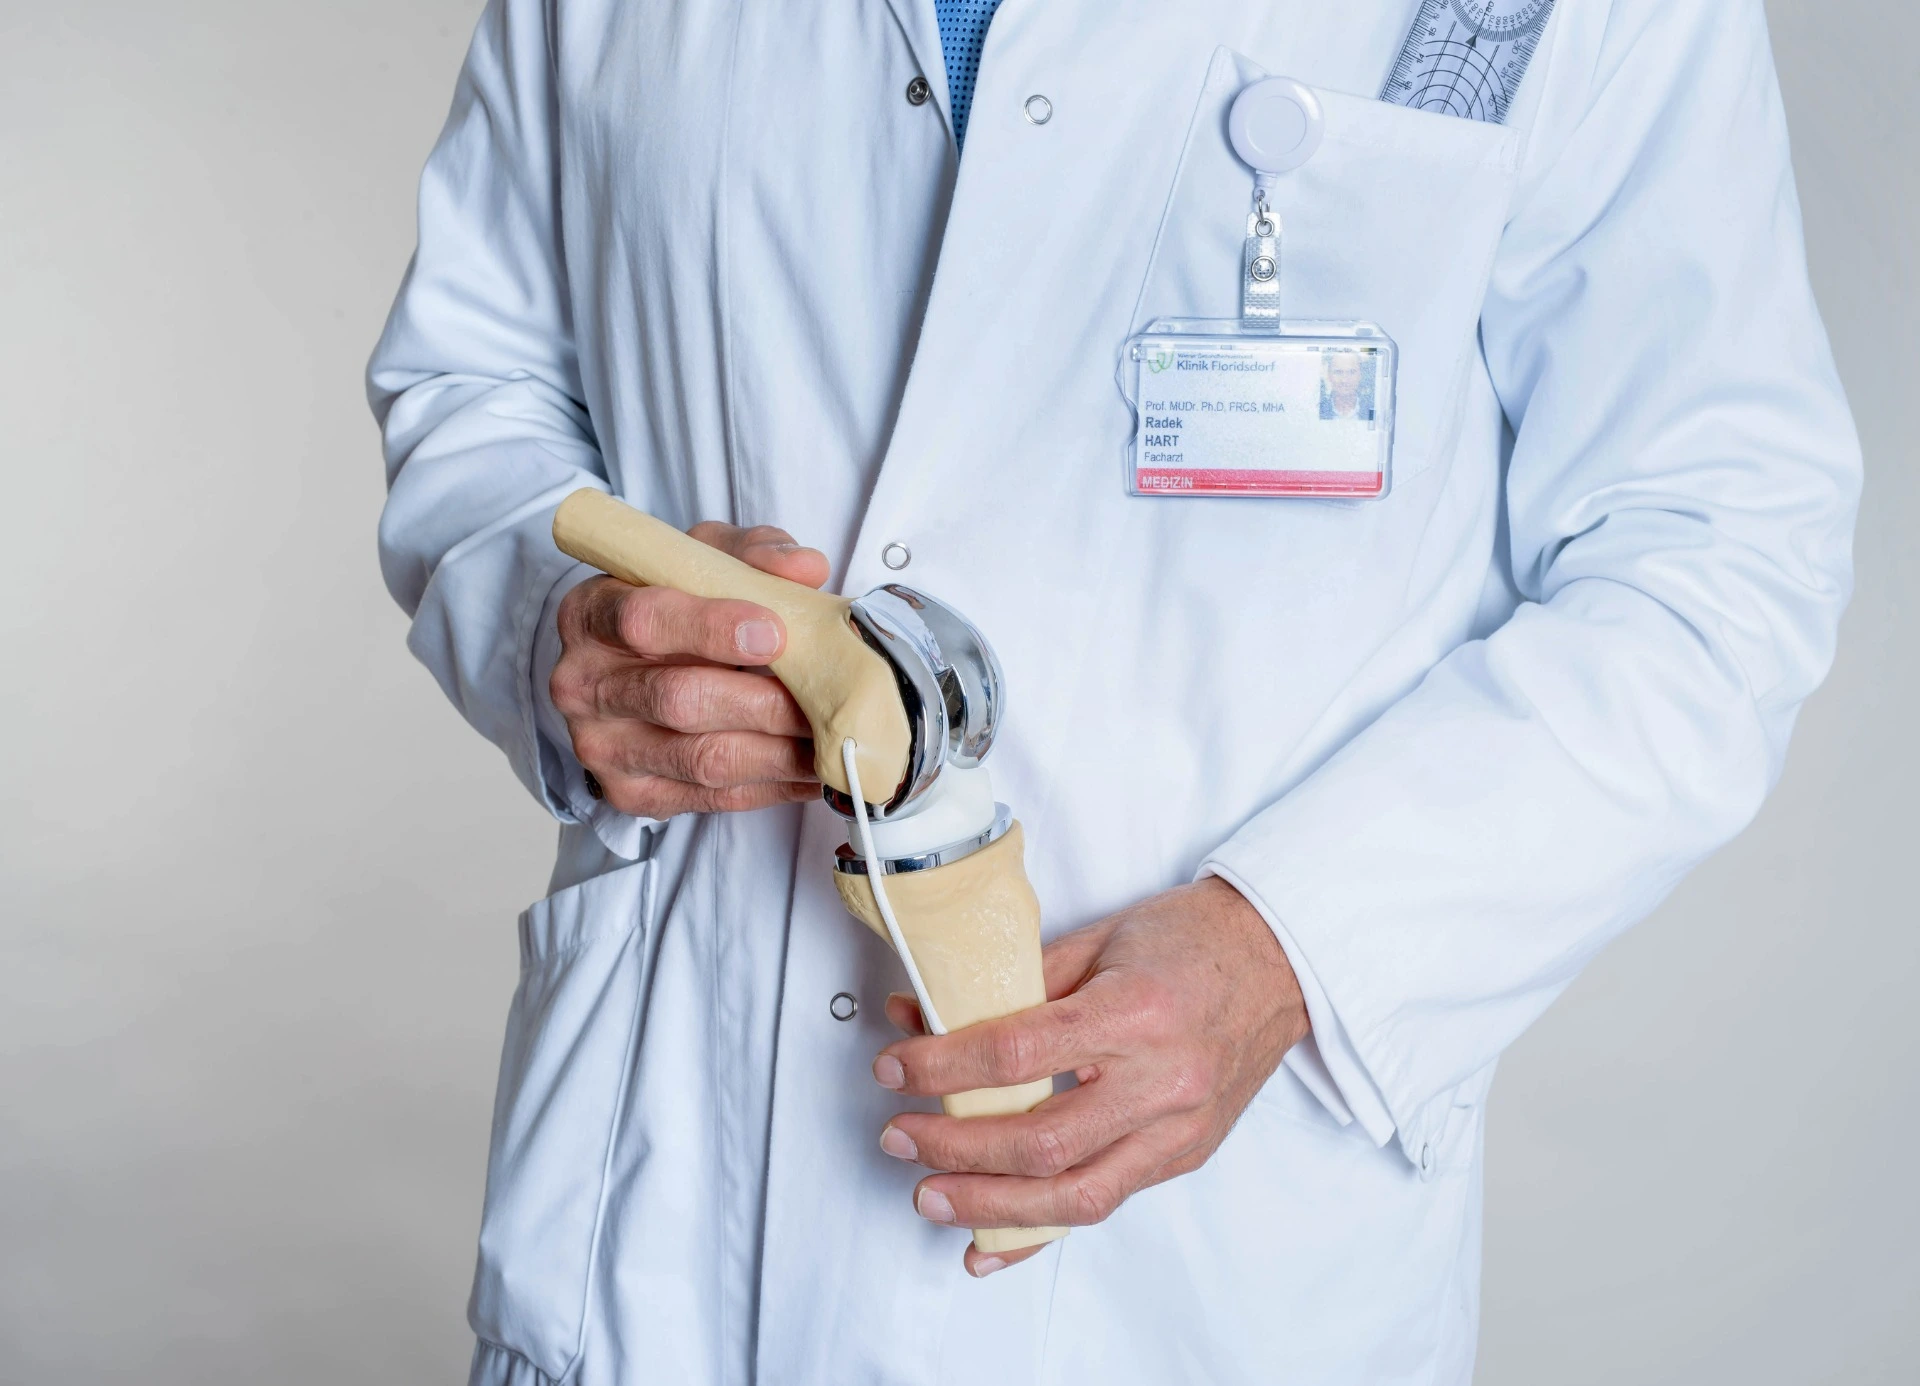 A doctor holds an artificial knee joint in his hand.